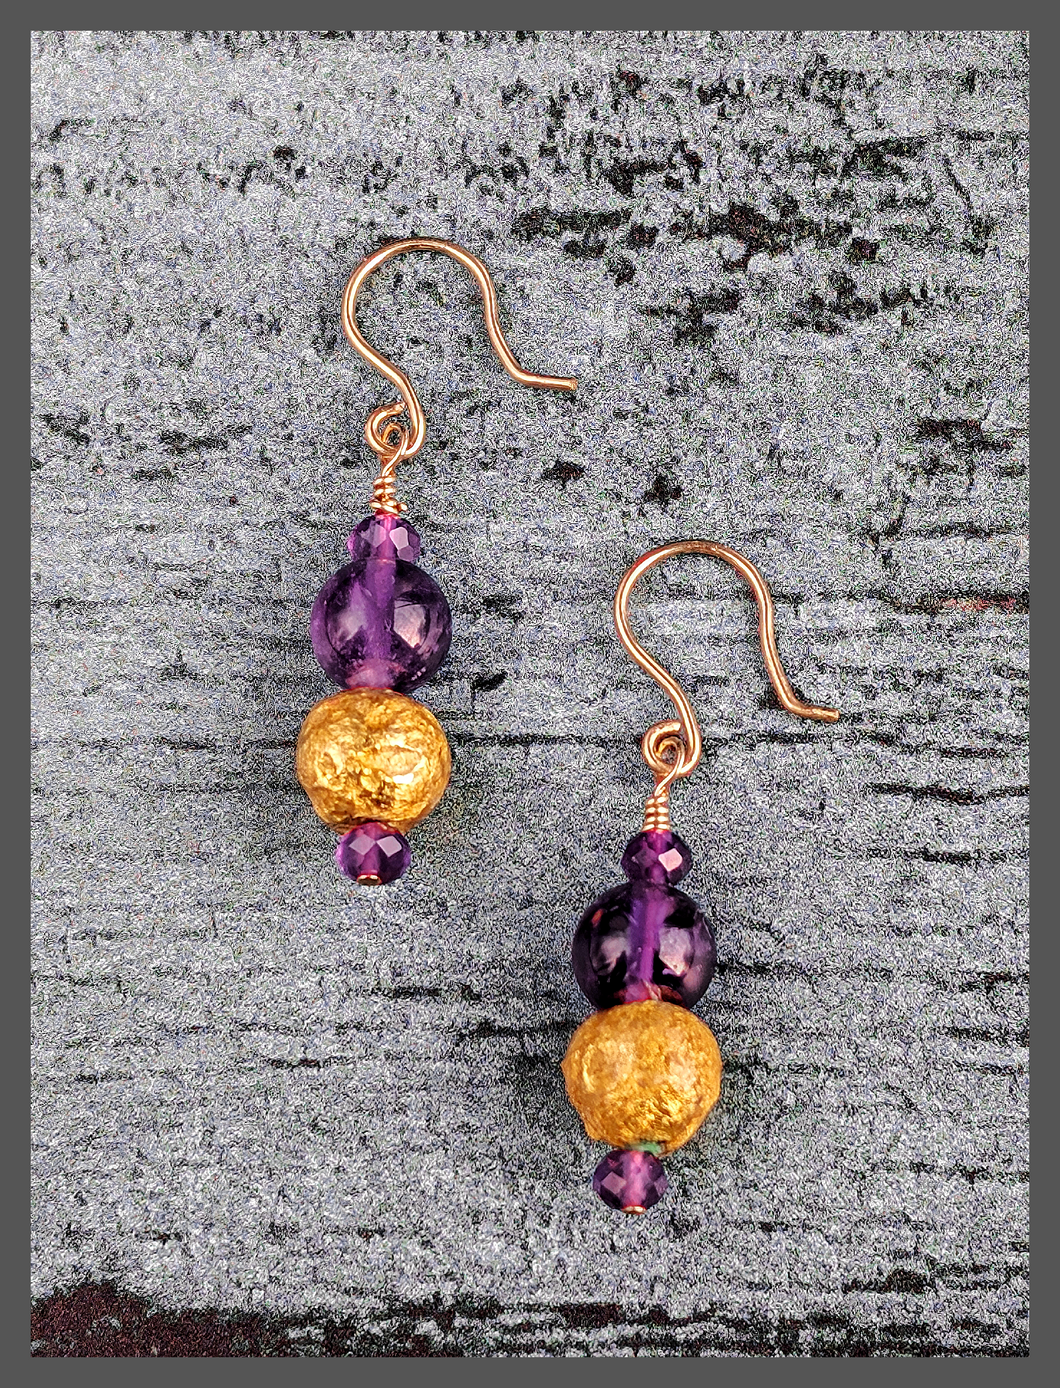 Amethyst Glow Earrings featuring faceted and smooth round  amethyst beads along with 23 karat hand gilded round lava stone. The earrings are 1.50